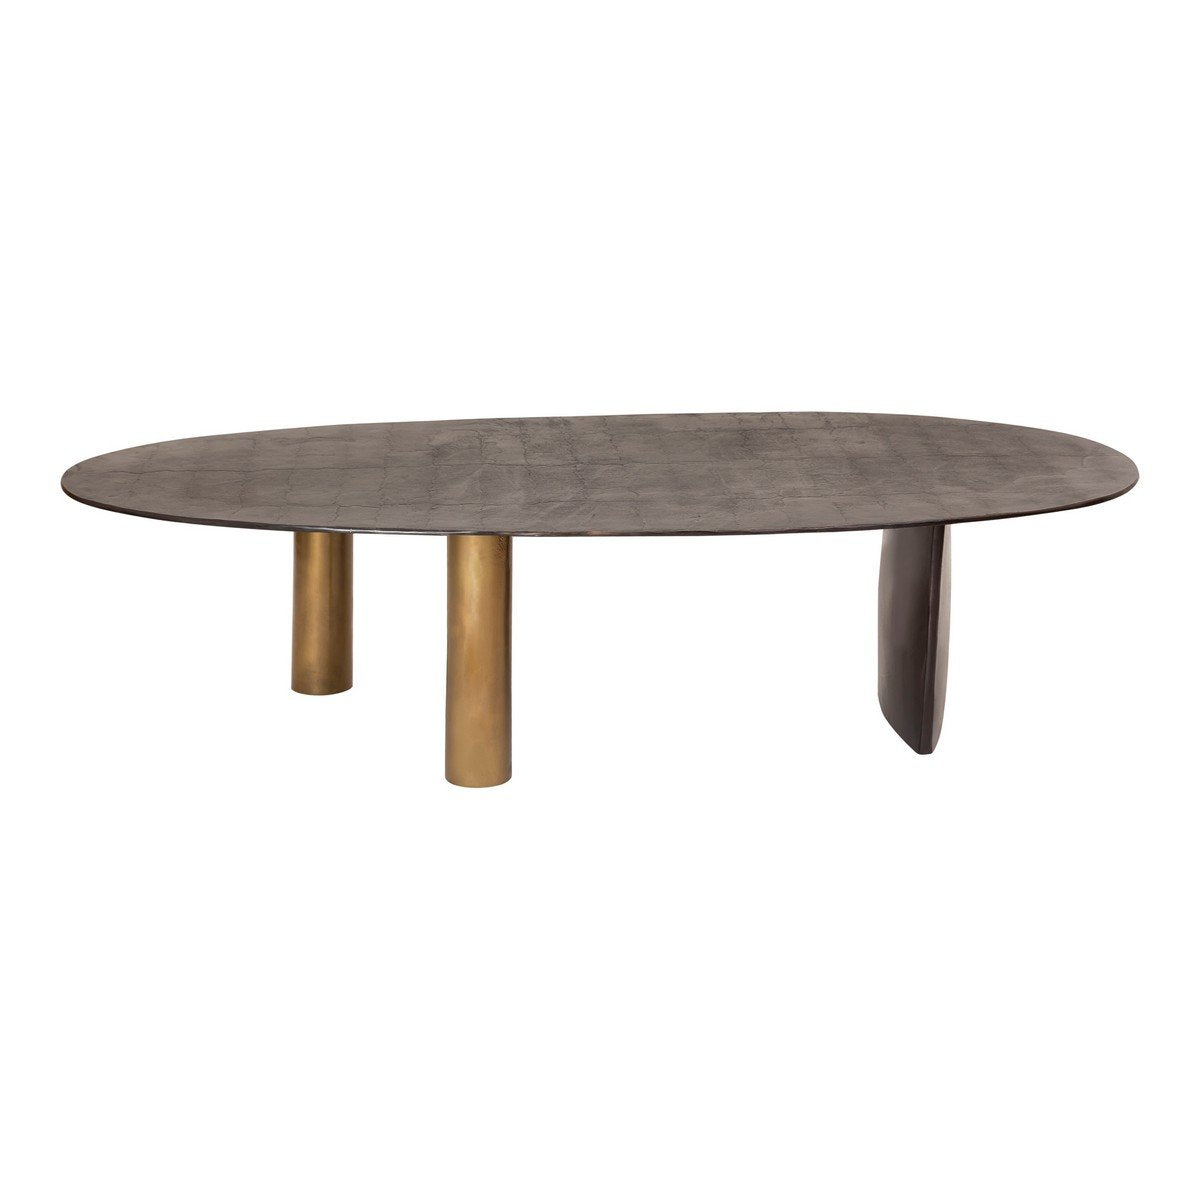 Moe's Home Collection Nicko Coffee Table - ZY-1029-02 - Moe's Home Collection - Coffee Tables - Minimal And Modern - 1